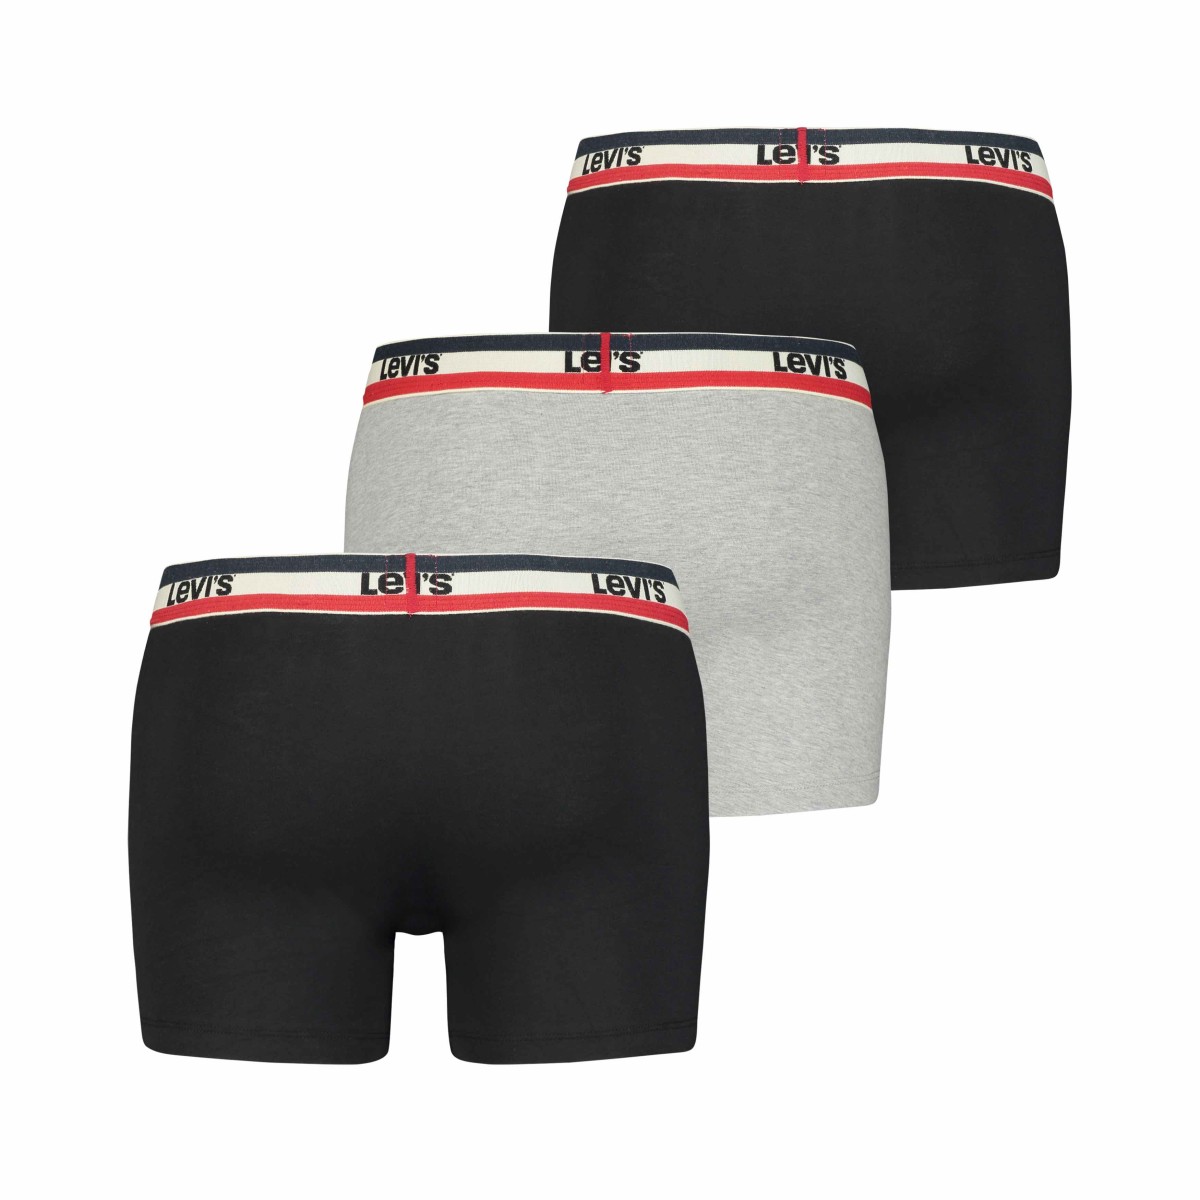 Levi's Cotton Stretch Breathable Boxer Briefs Underwear For Men's Pack Of 3  (M) in Tirupur at best price by Vintage Clothing Company - Justdial